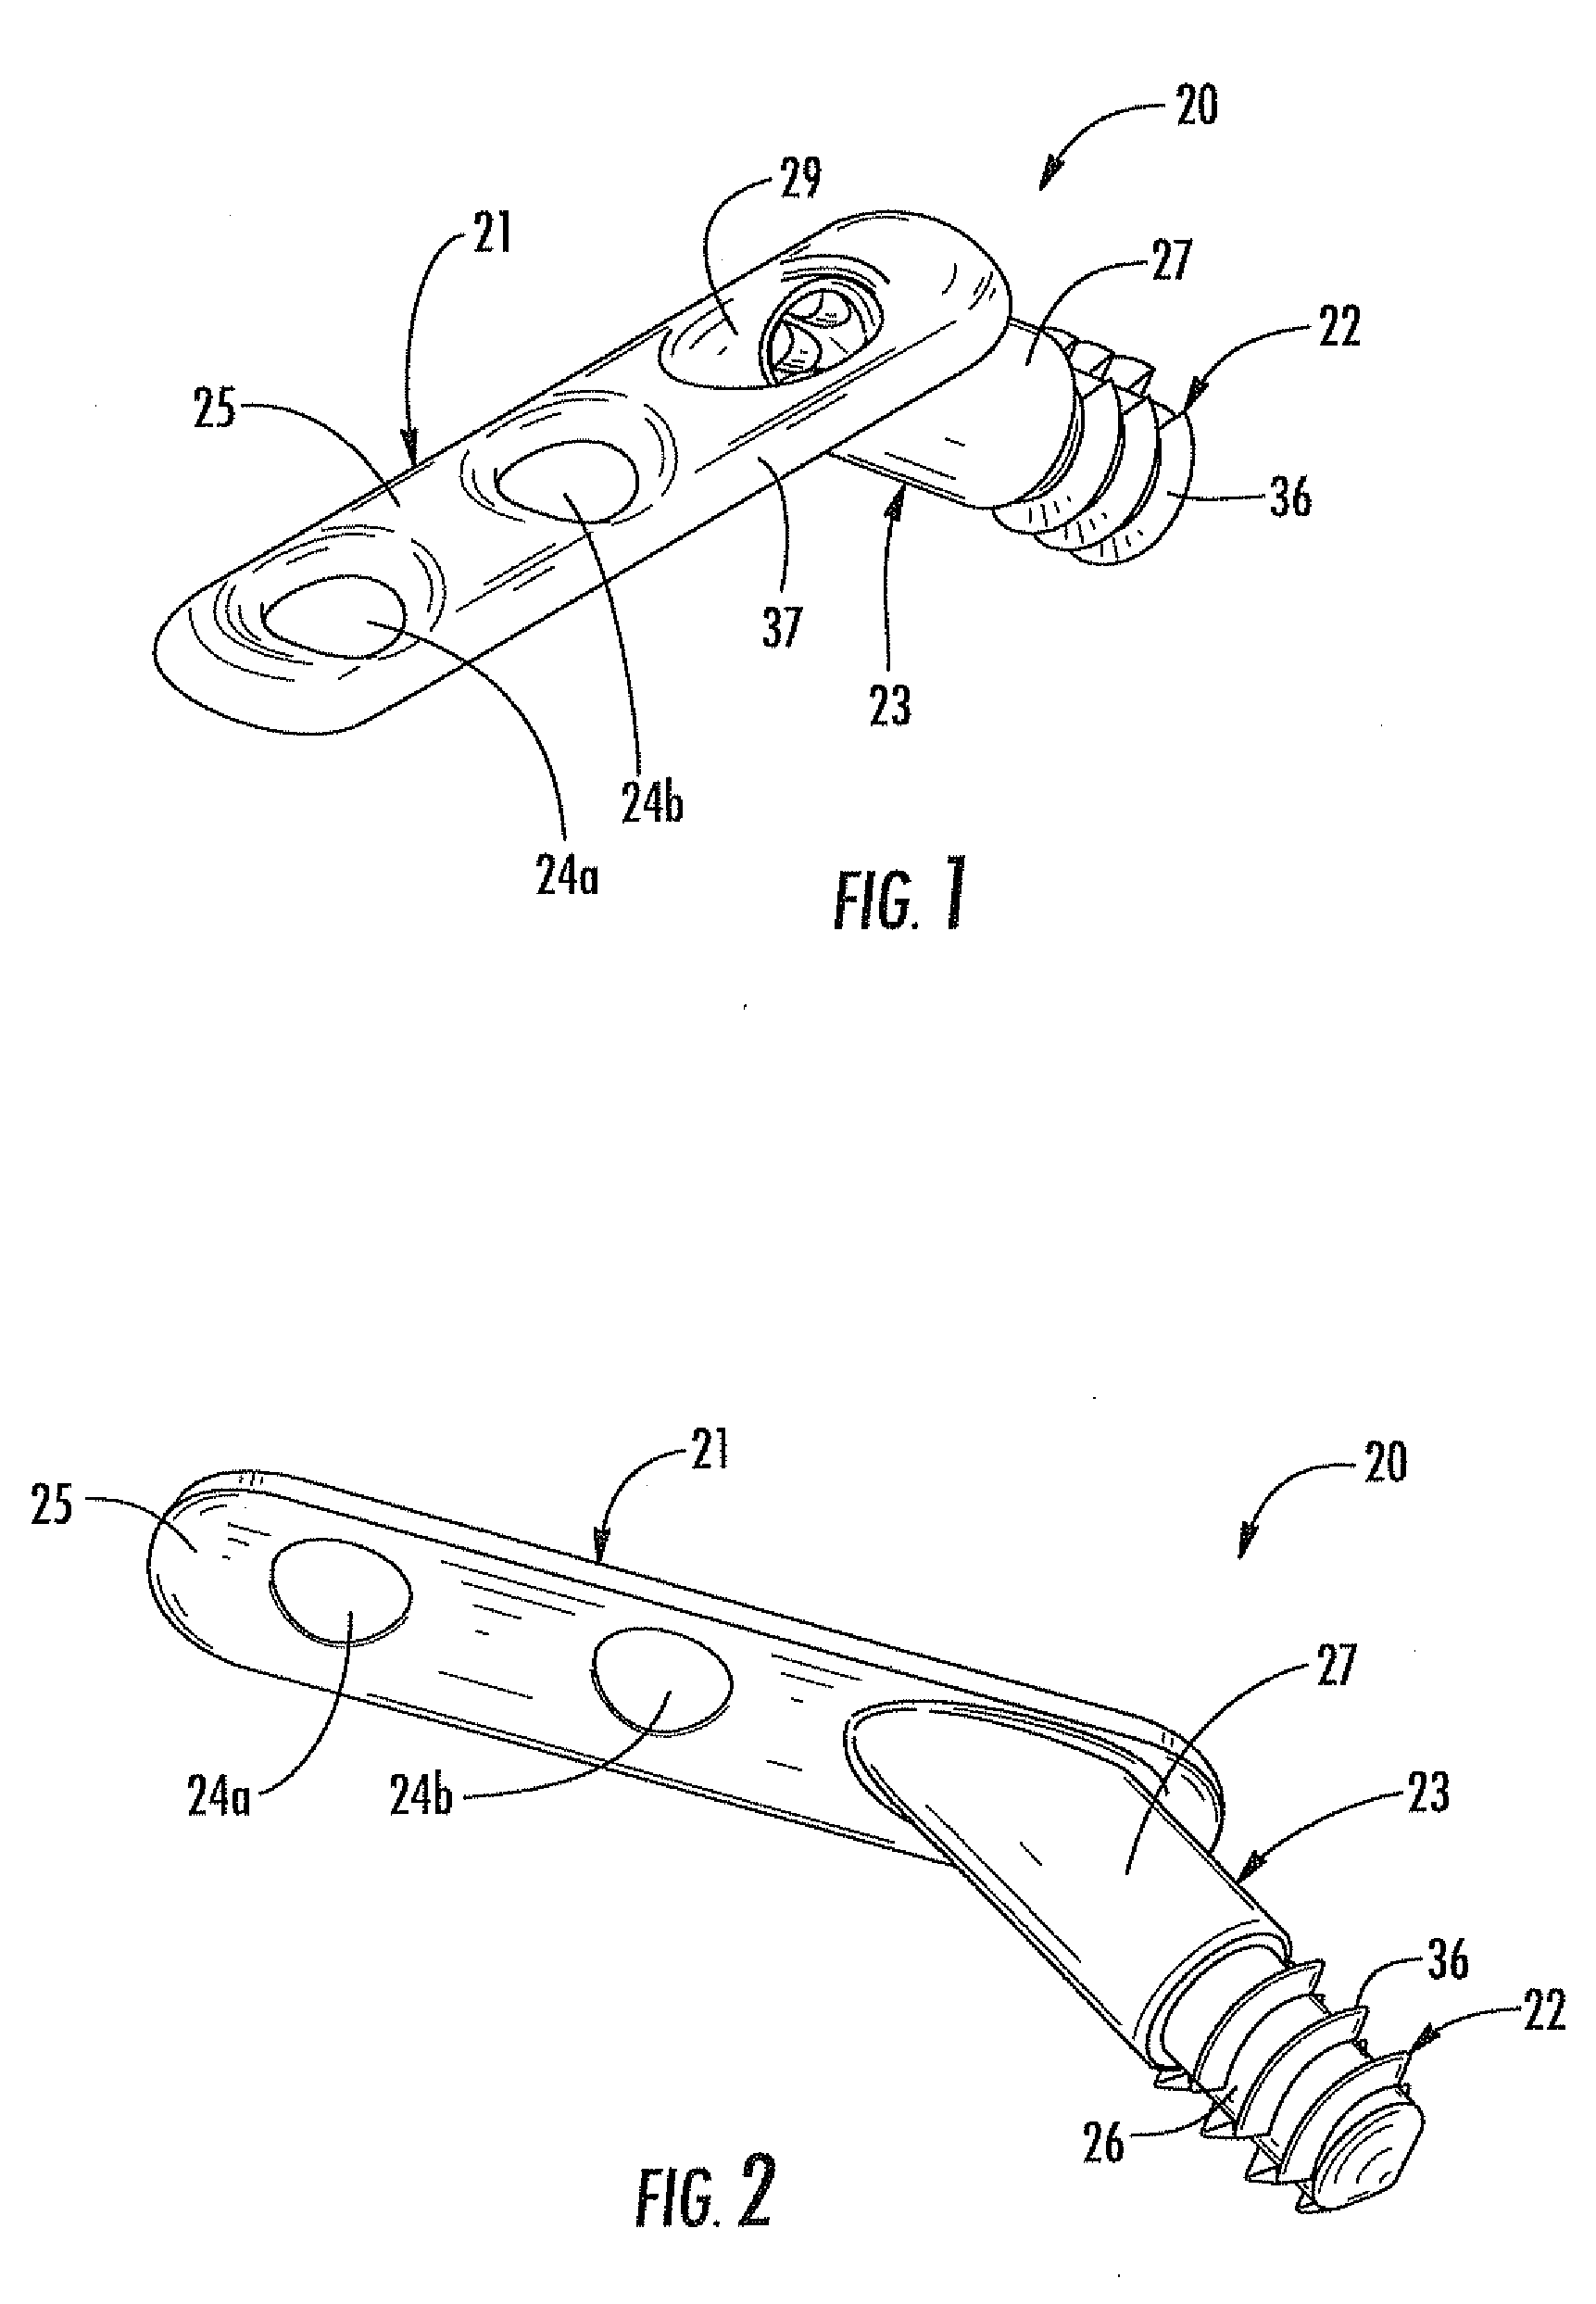 Arthrodesis implant for finger joints and related methods